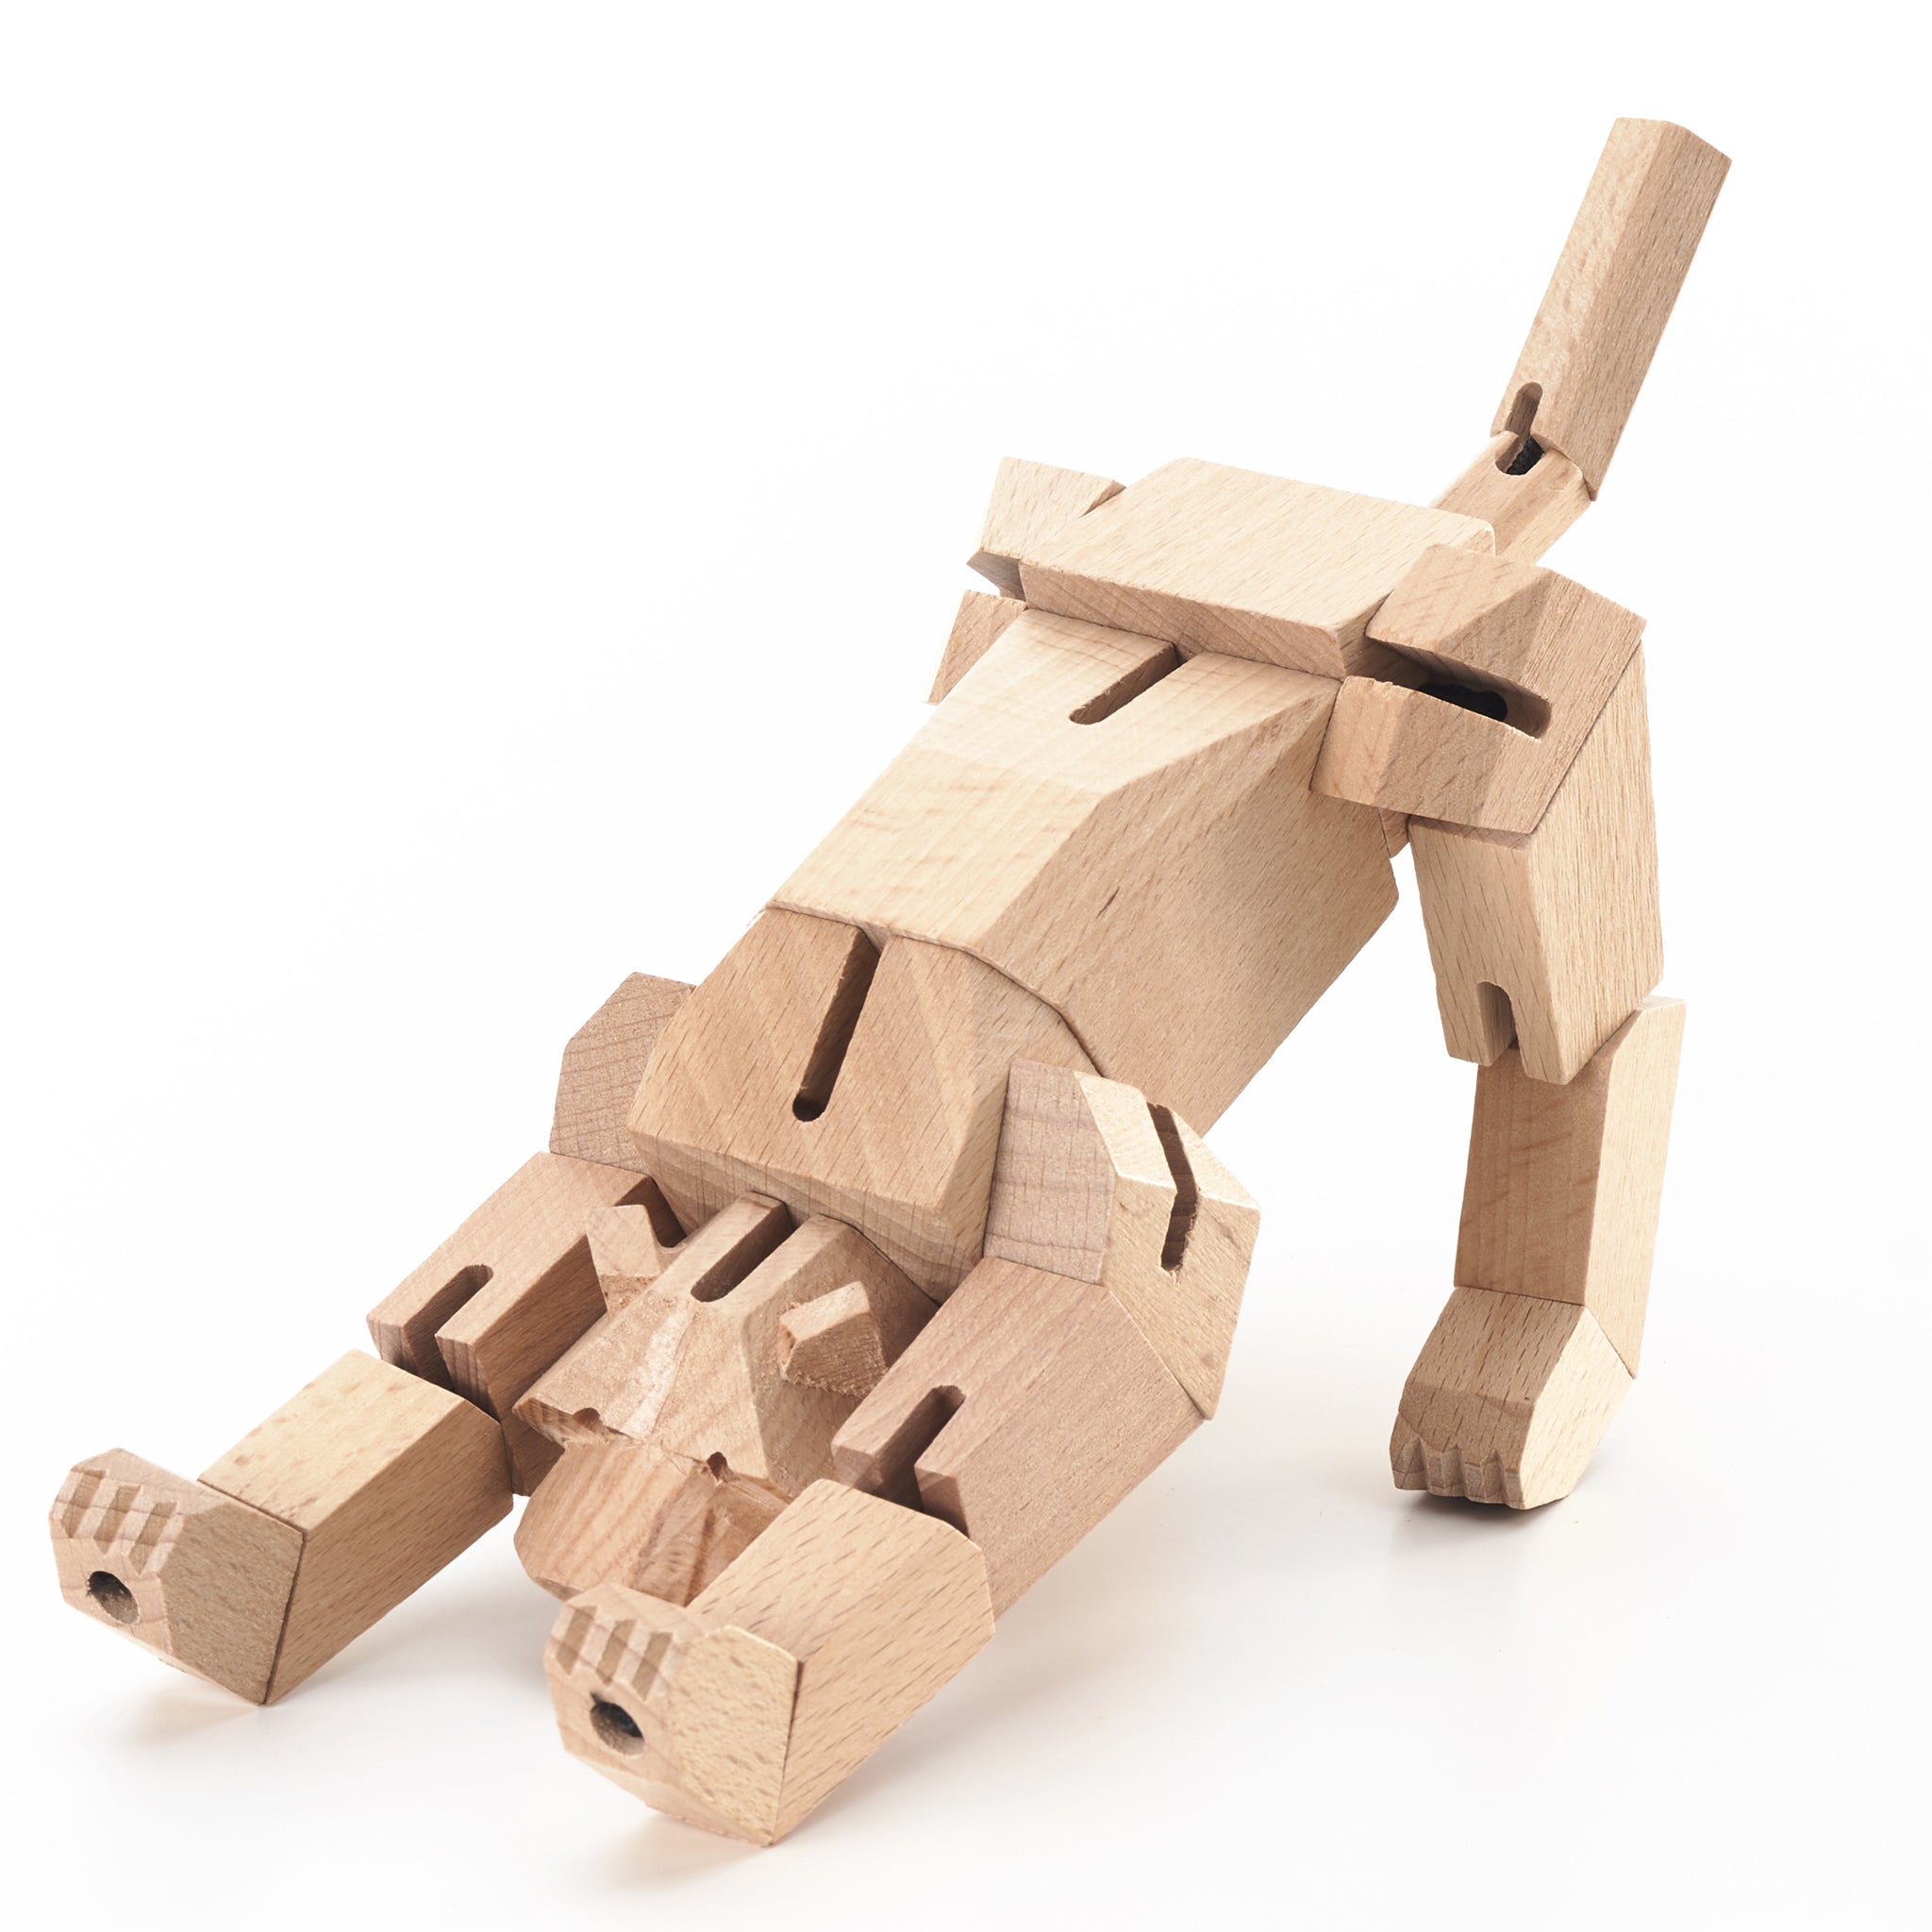 Morphits ® Tiger Wooden Toy: Roaring Adventures Await in our Wooden Playset - Yoshiaki Ito Design Stand N3